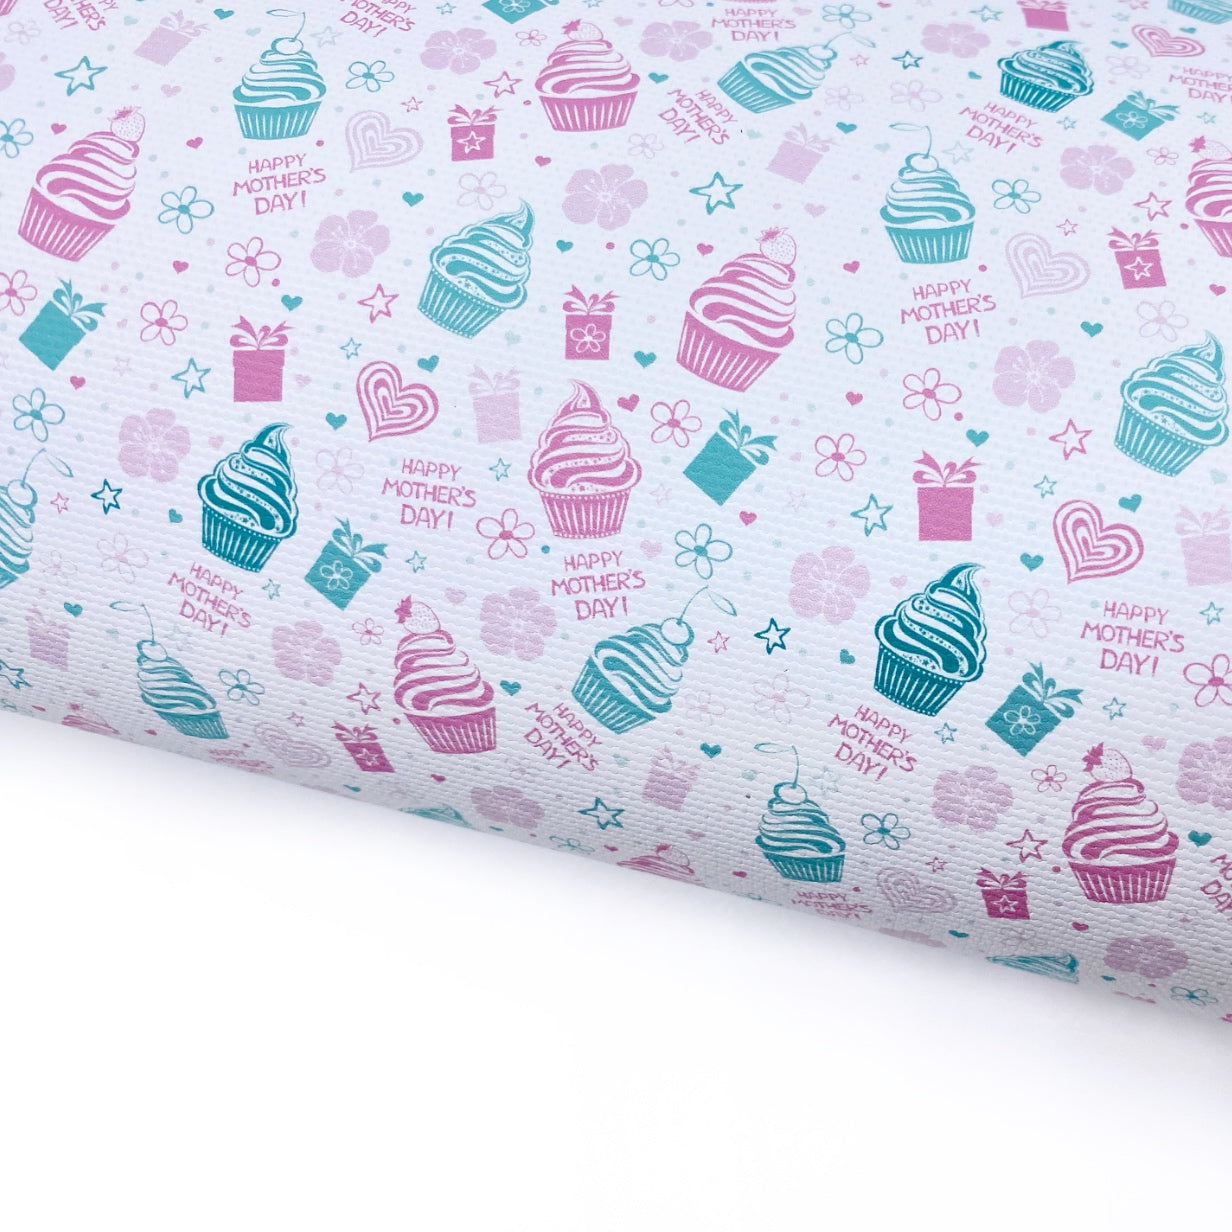 Happy Mothers Day Cupcakes Lux Premium Printed Bow Fabric